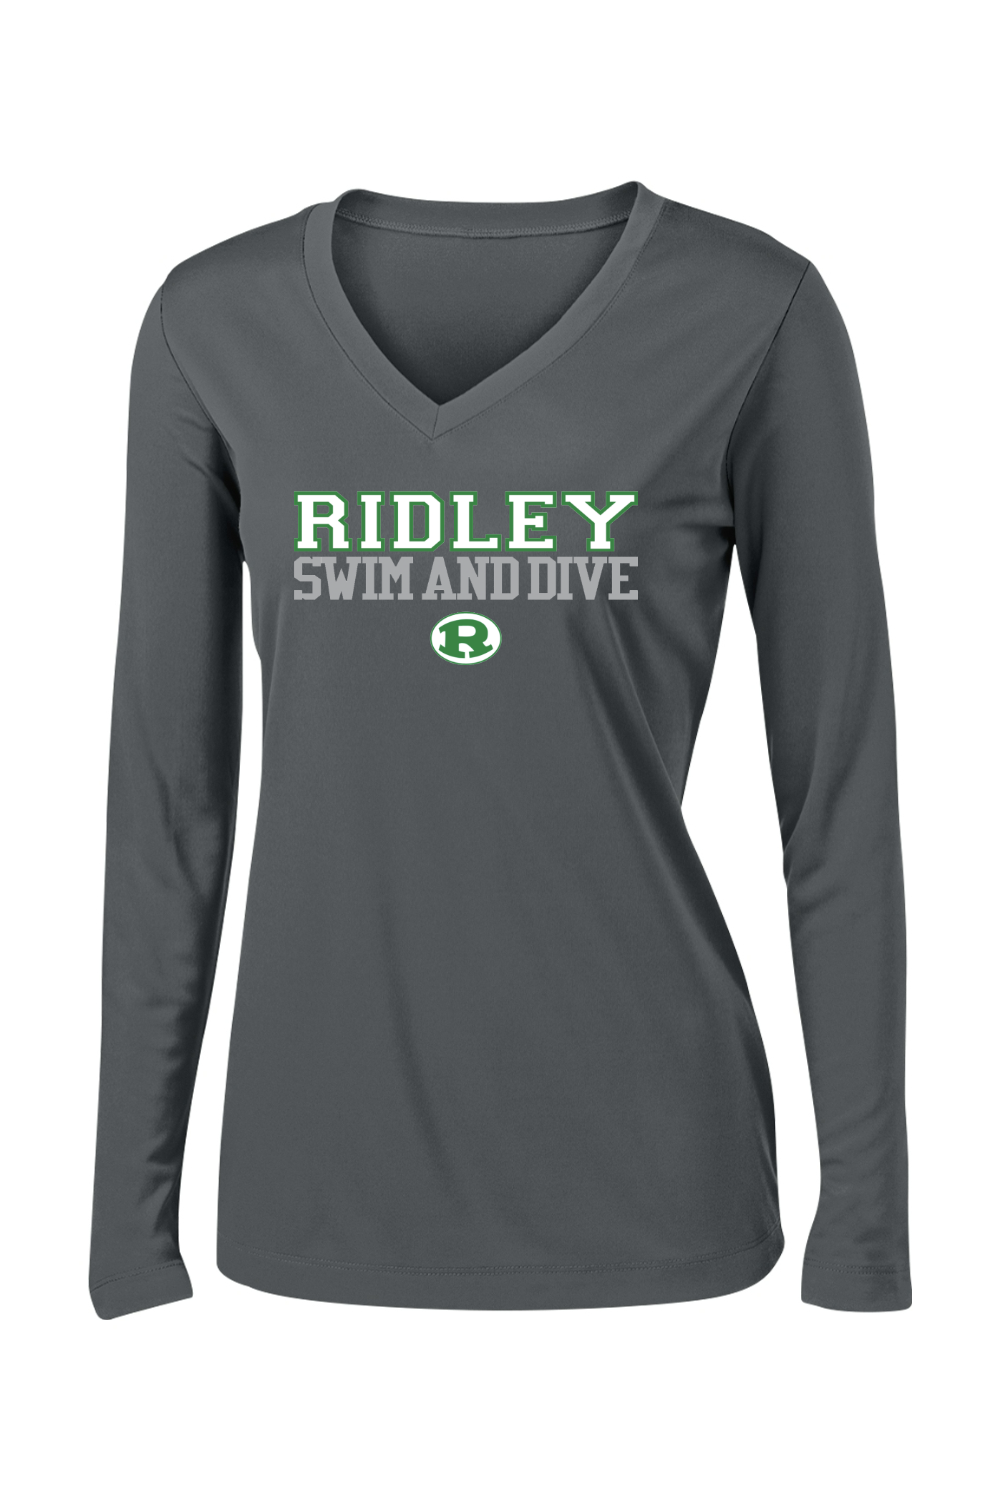 Ridley Swim and Dive Sport-Tek Ladies PosiCharge Competitor Long Sleeve V-Neck Tee